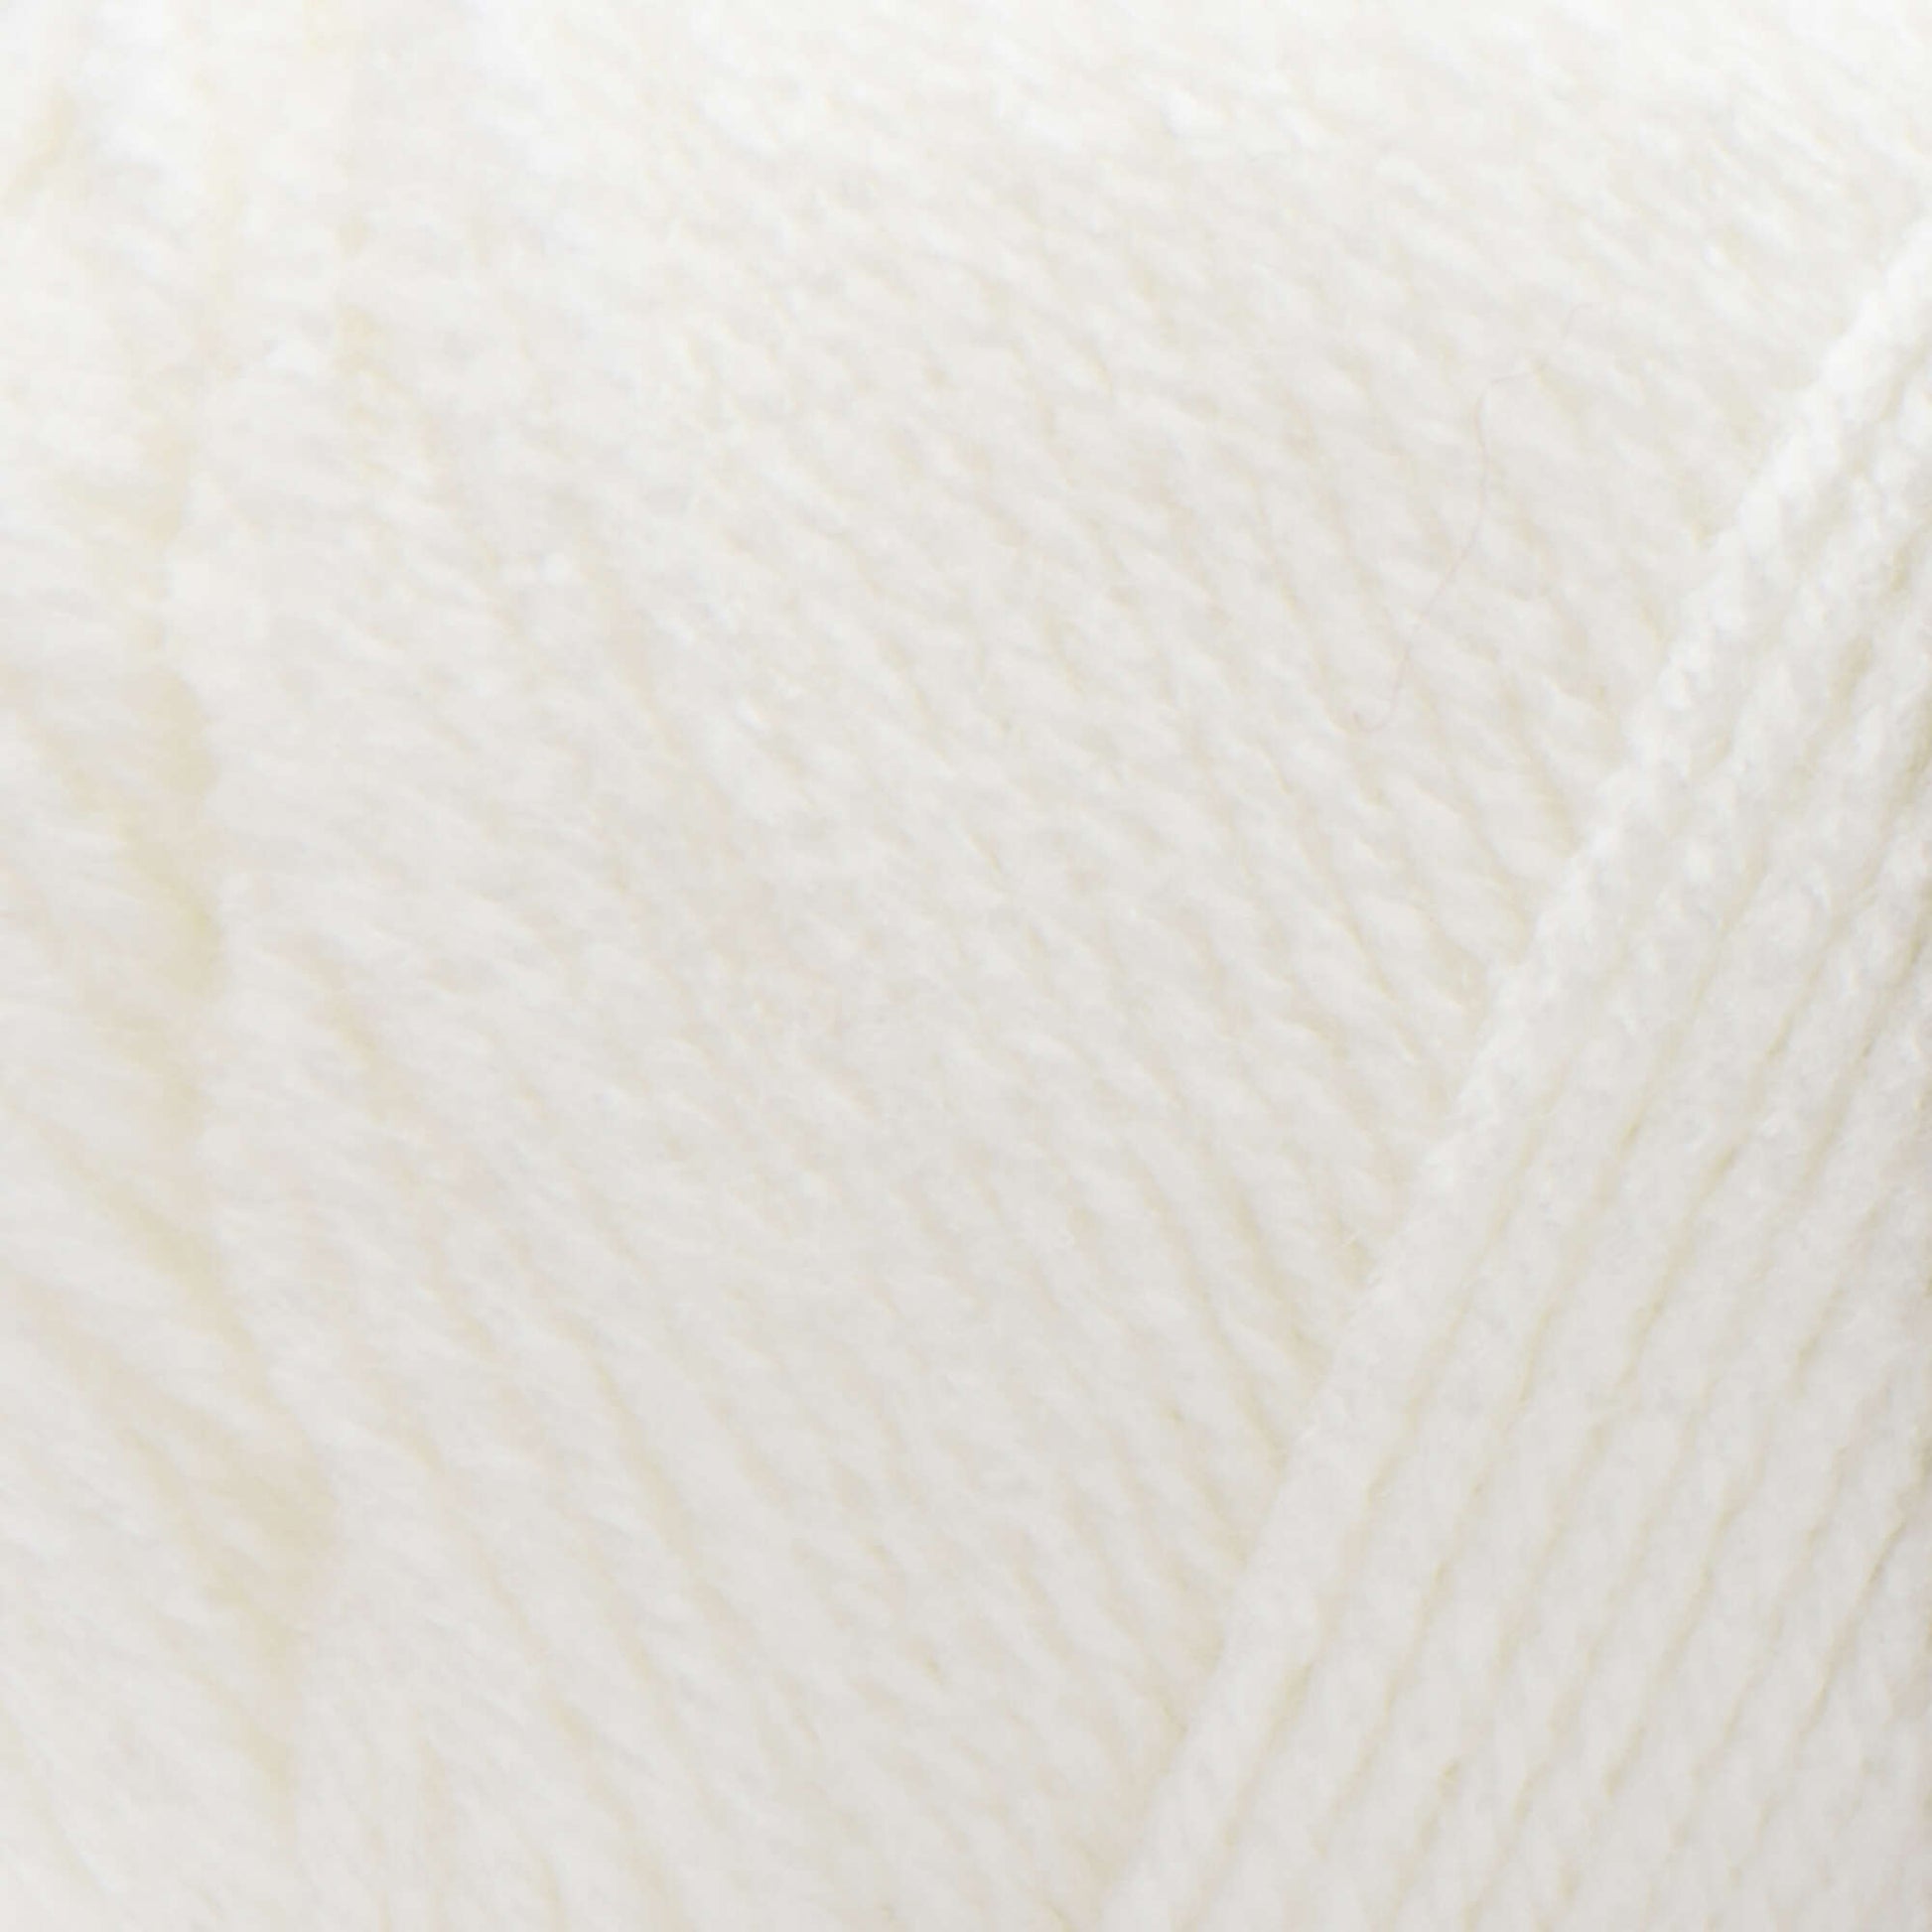 Red Heart Classic Yarn - Clearance shades Off-White